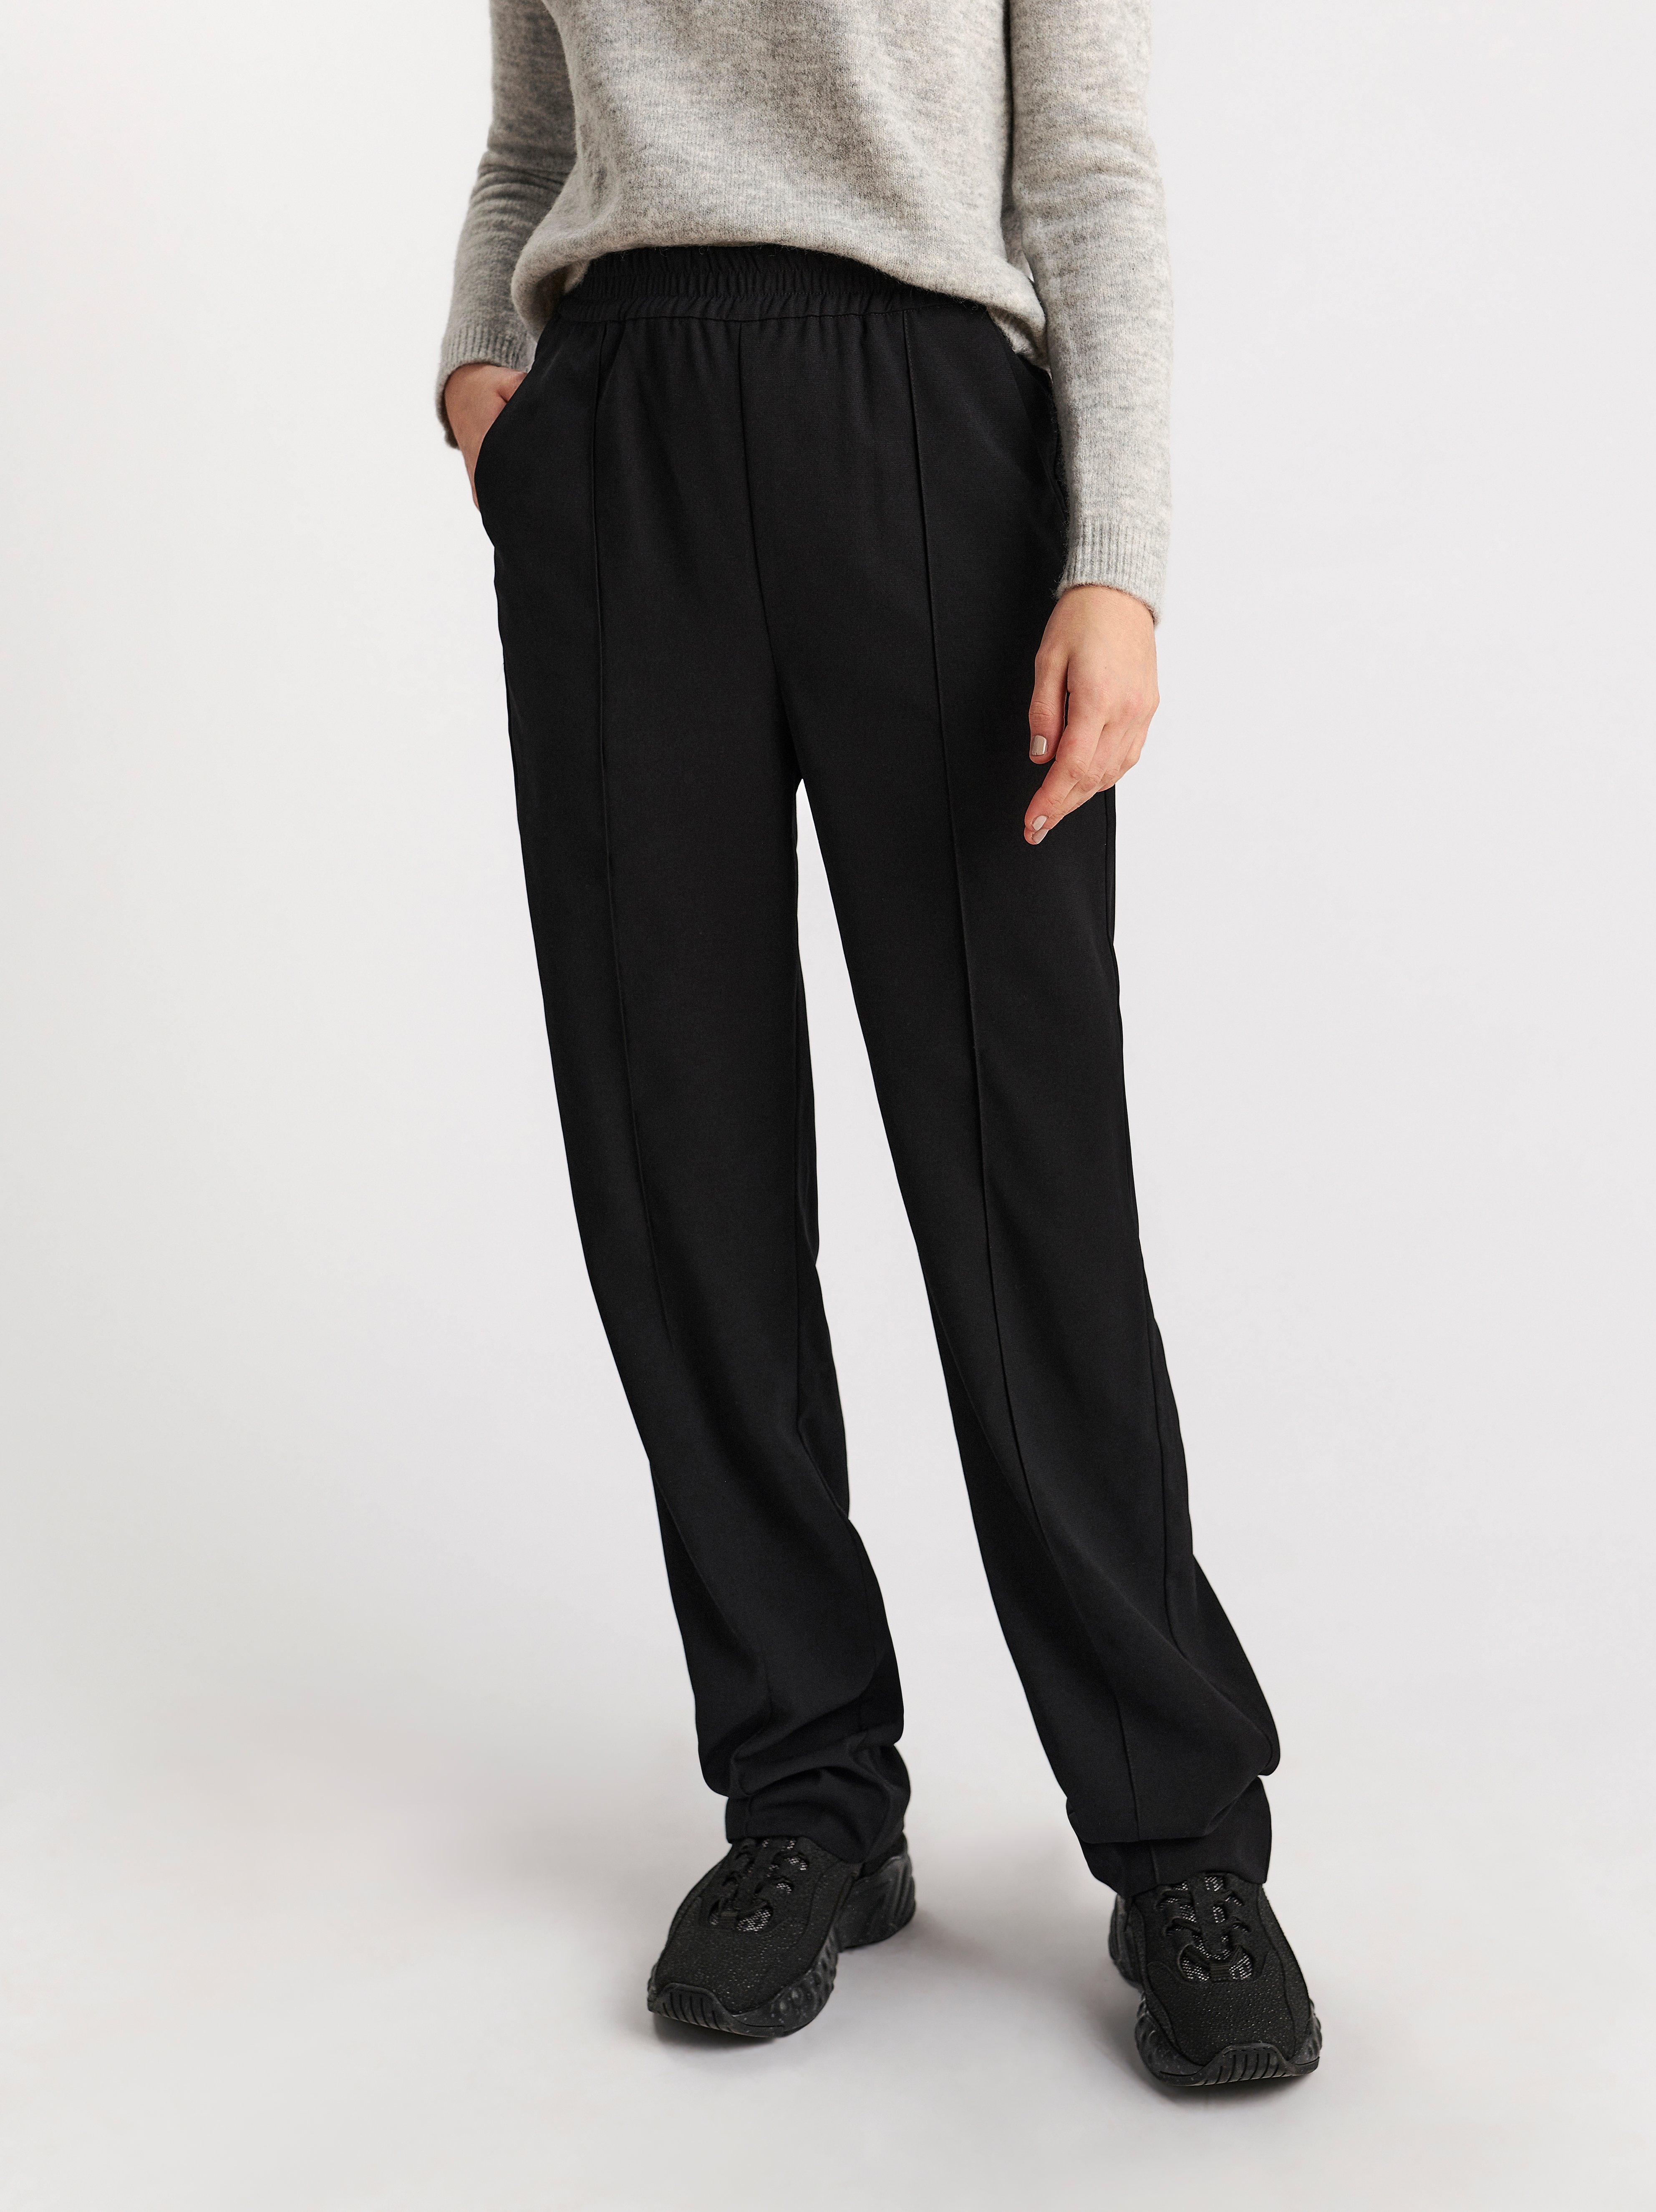 black trousers tapered